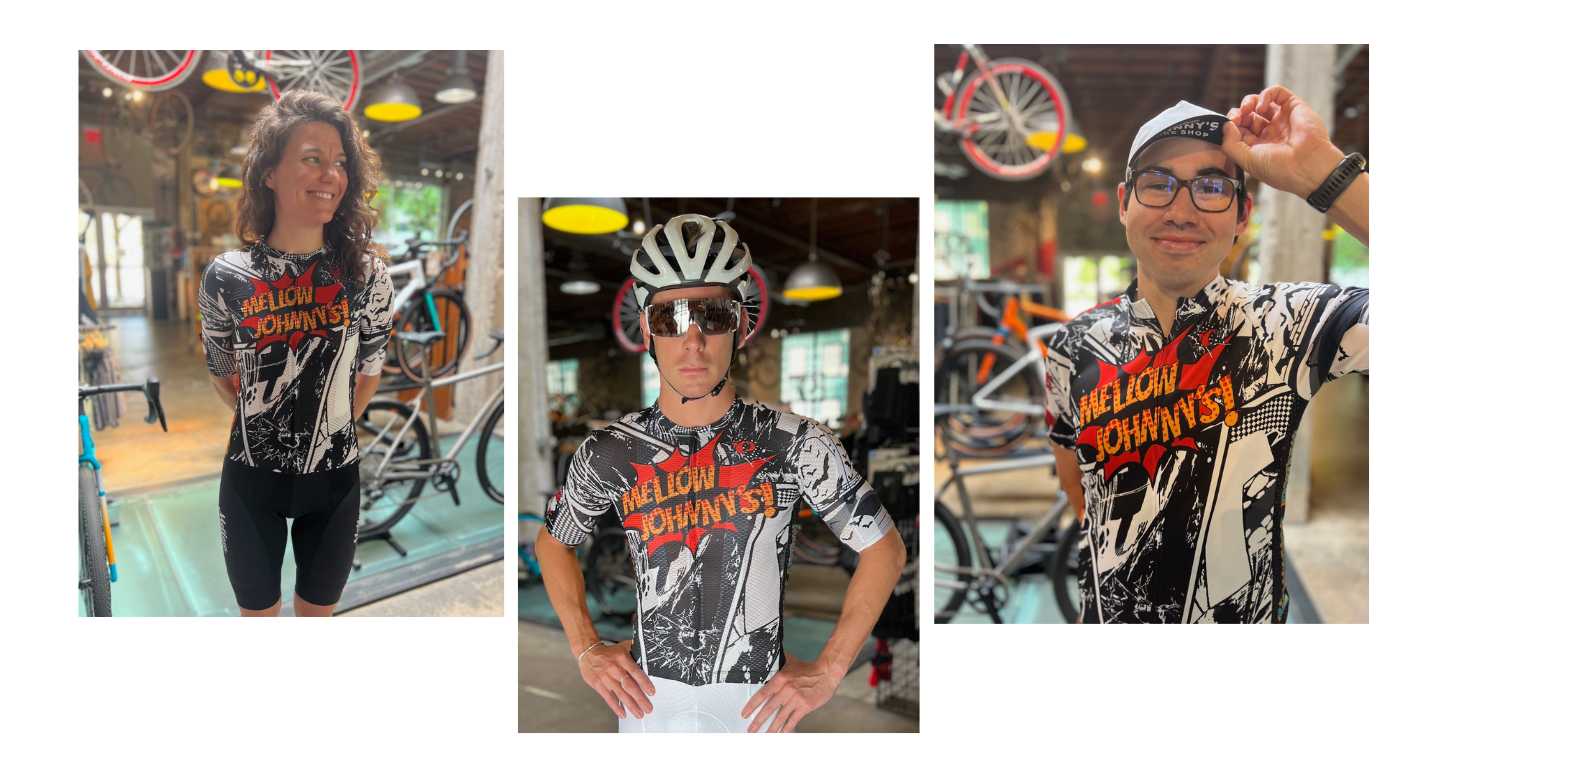 The MJ's Marvel Jersey by Pearl Izumi